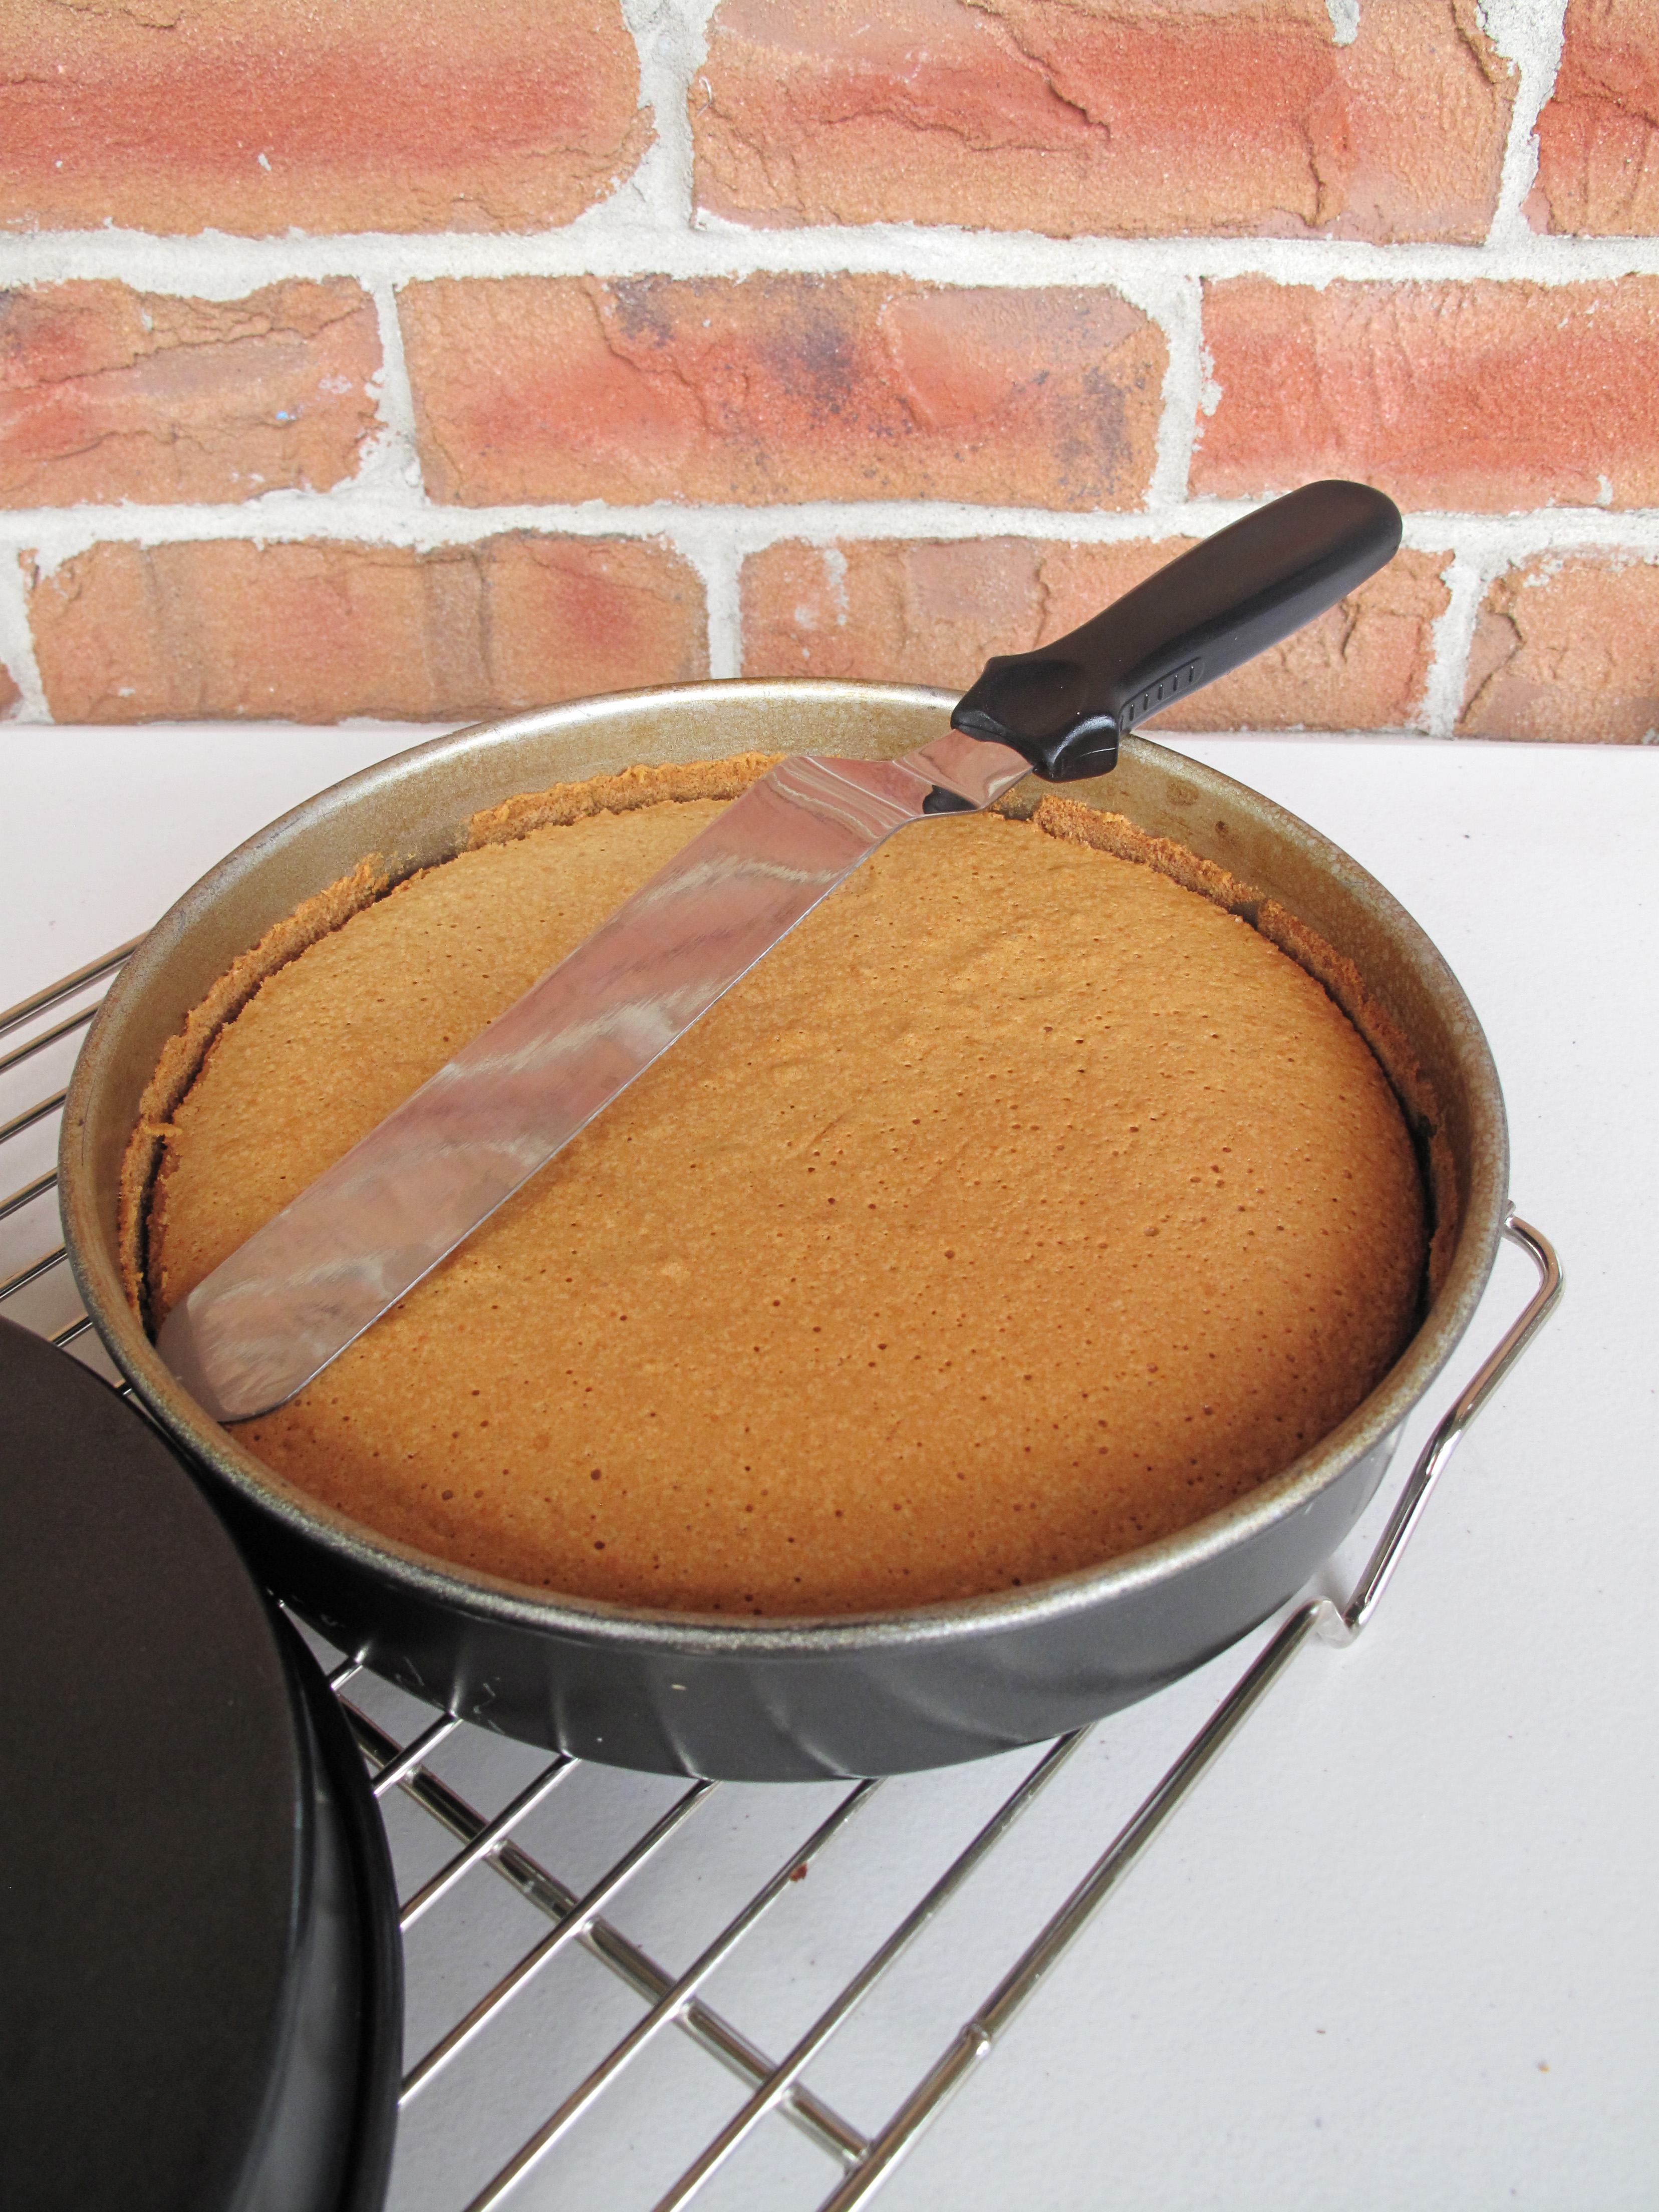 When Should You Remove Cake From The Pan?